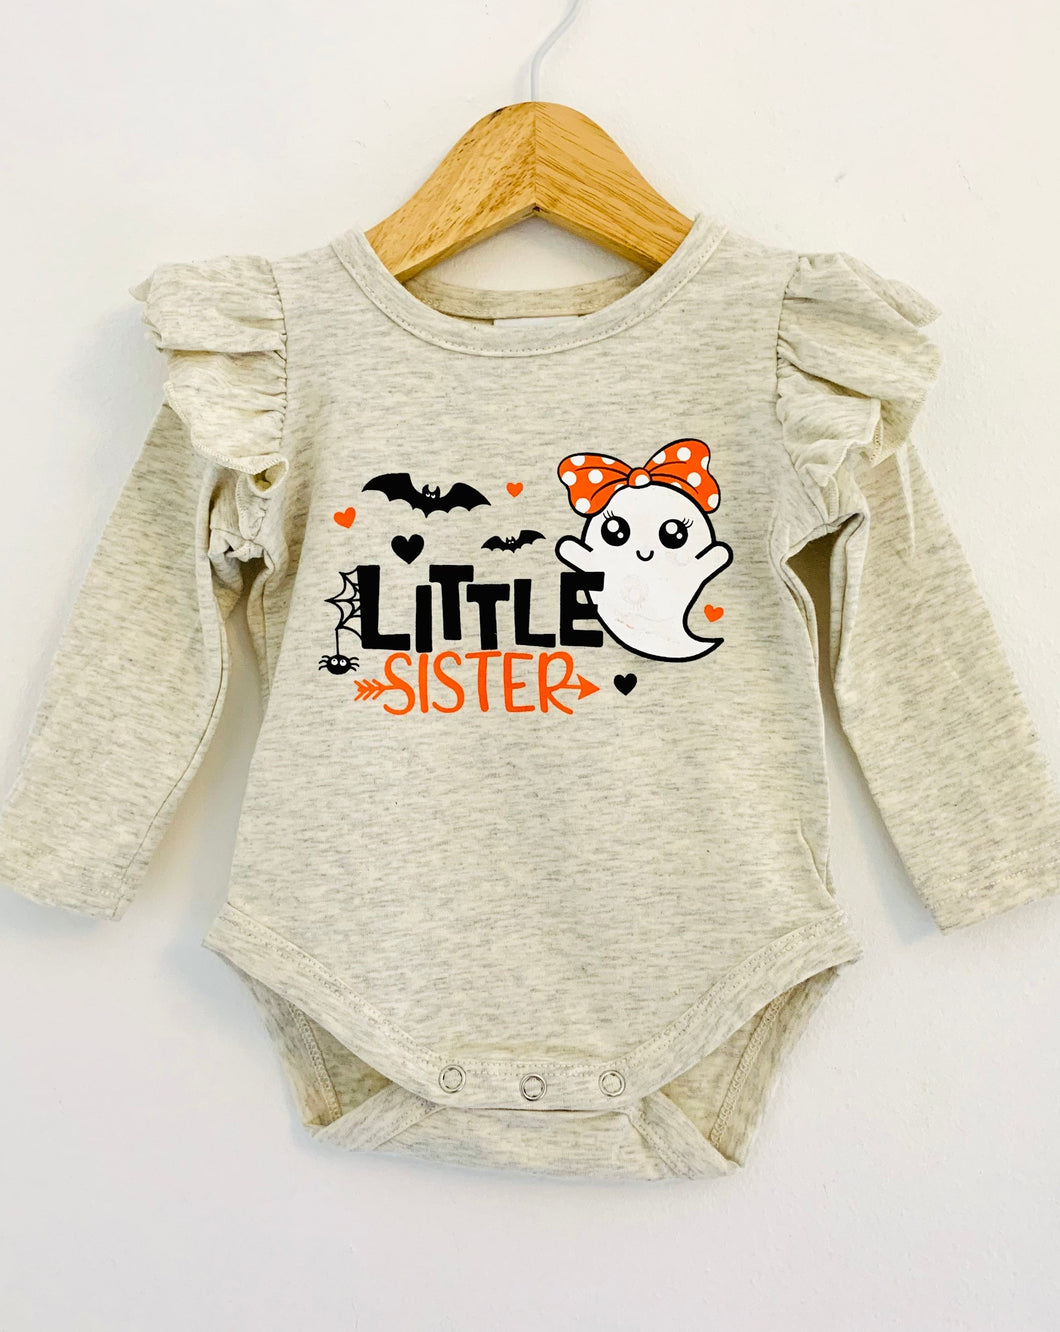 Little Boo Sister (limited edition)